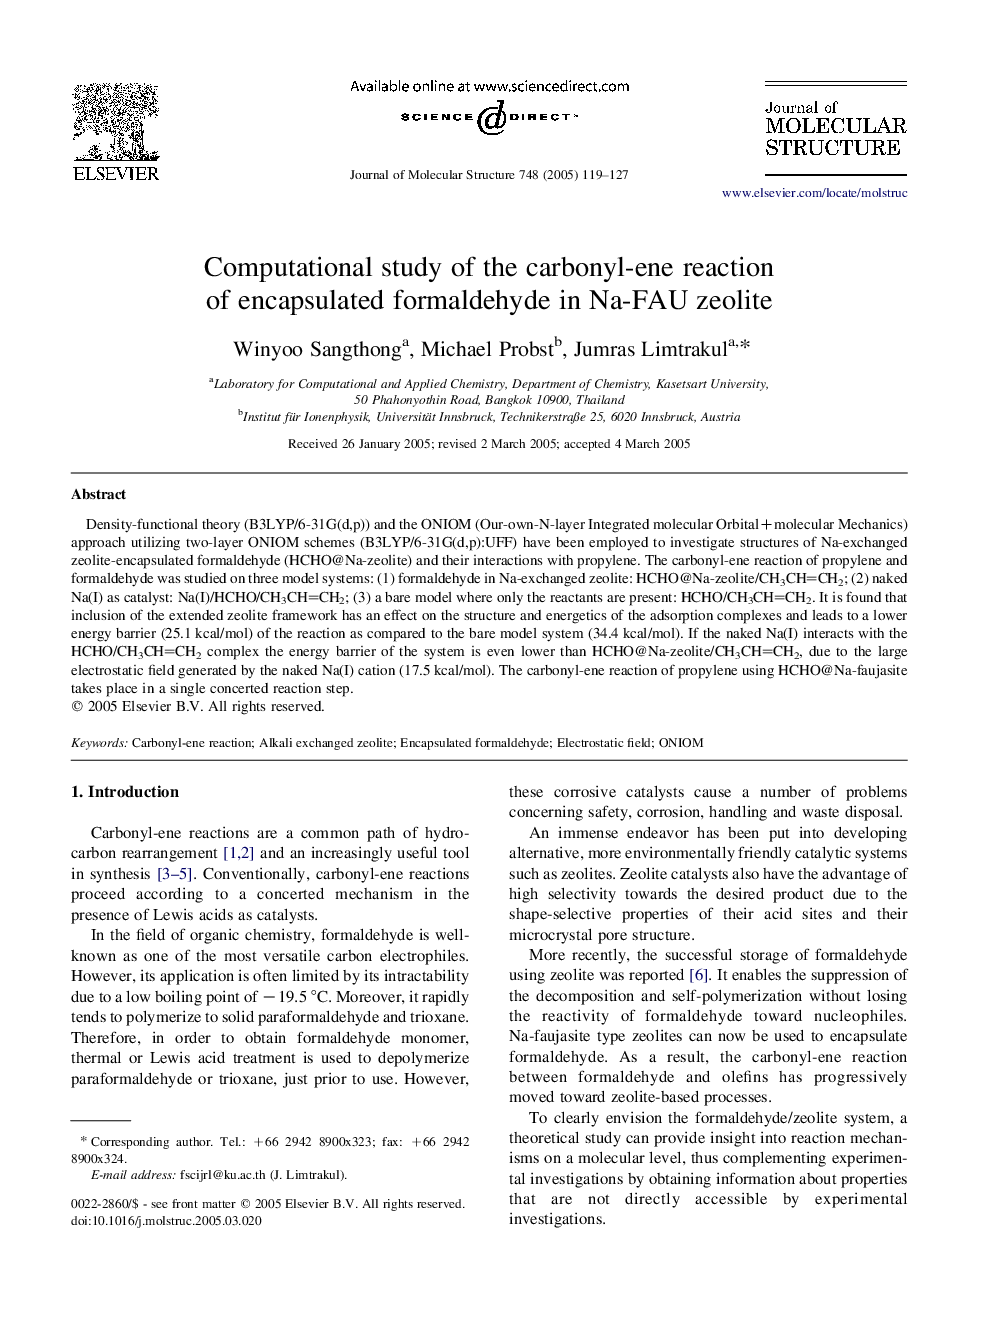 Computational study of the carbonyl-ene reaction of encapsulated formaldehyde in Na-FAU zeolite